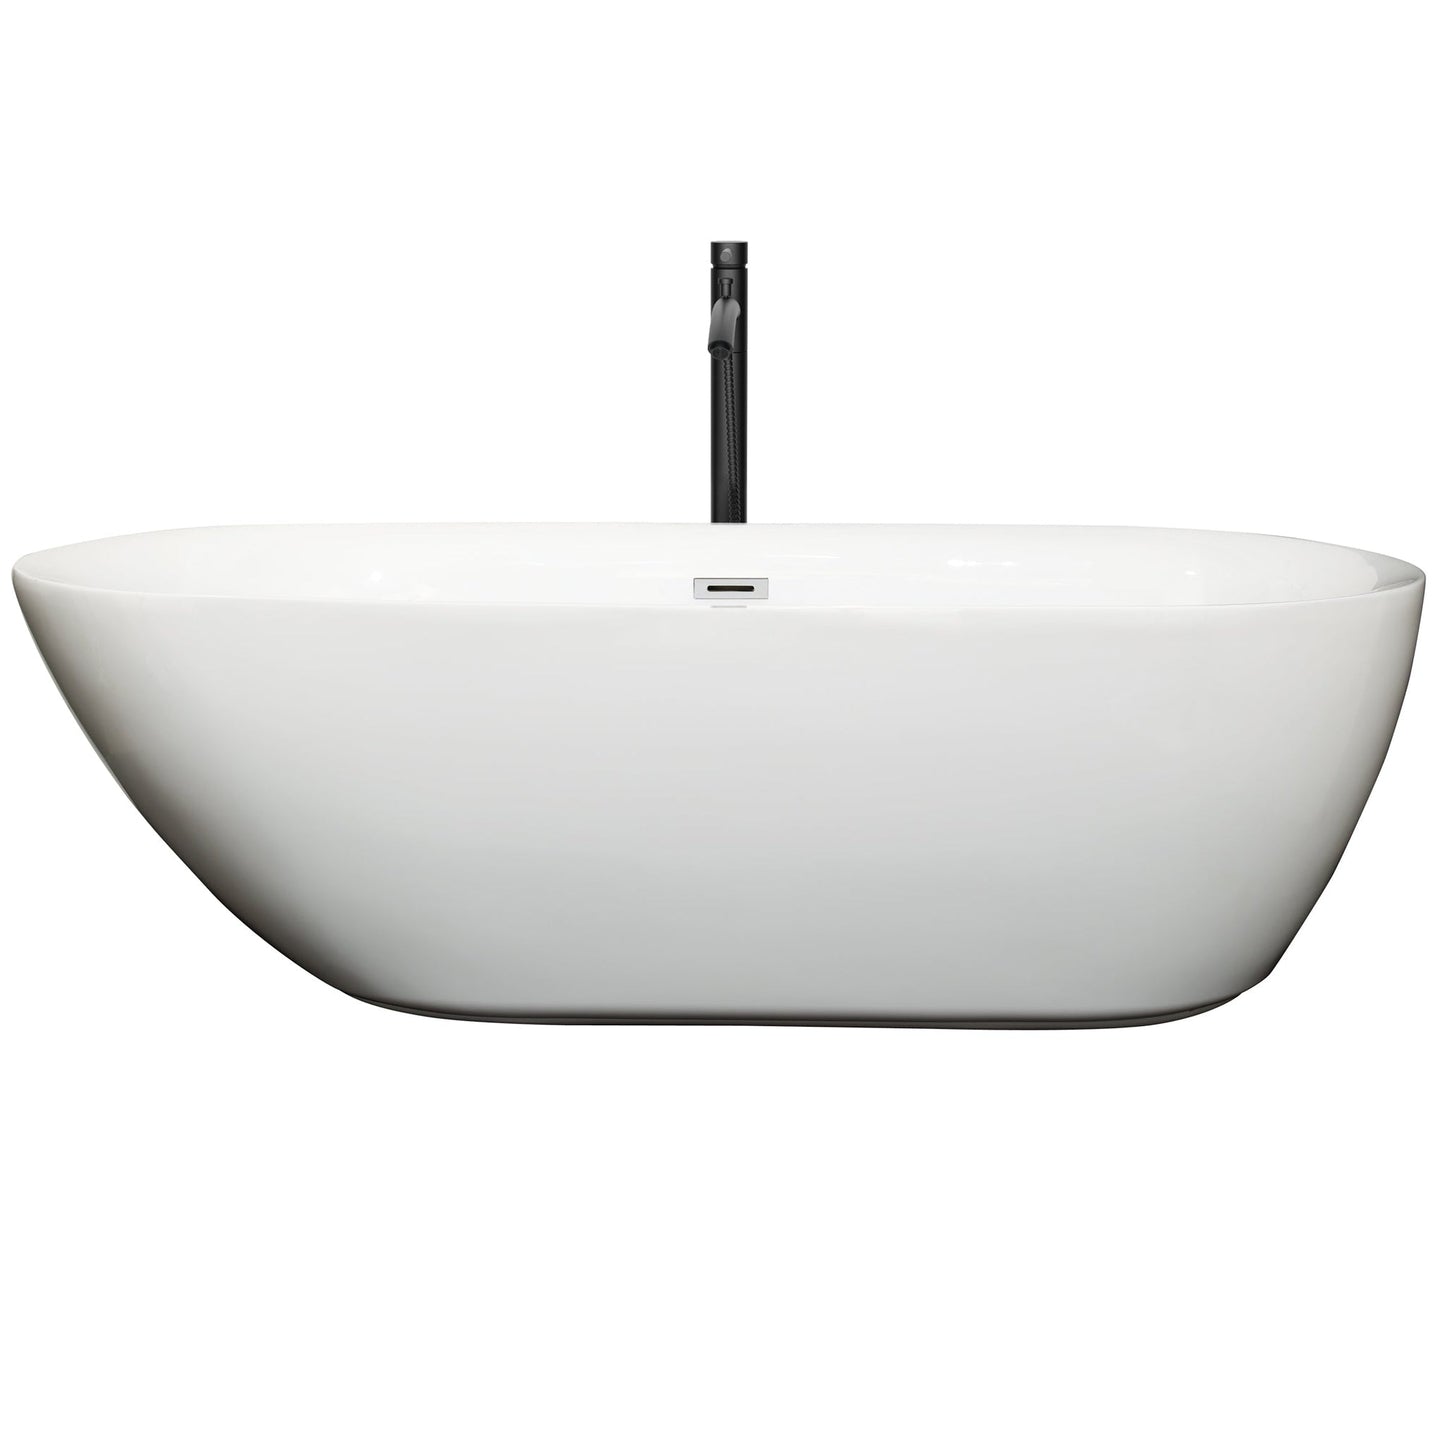 Wyndham Collection Melissa 71" Freestanding Bathtub in White With Polished Chrome Trim and Floor Mounted Faucet in Matte Black